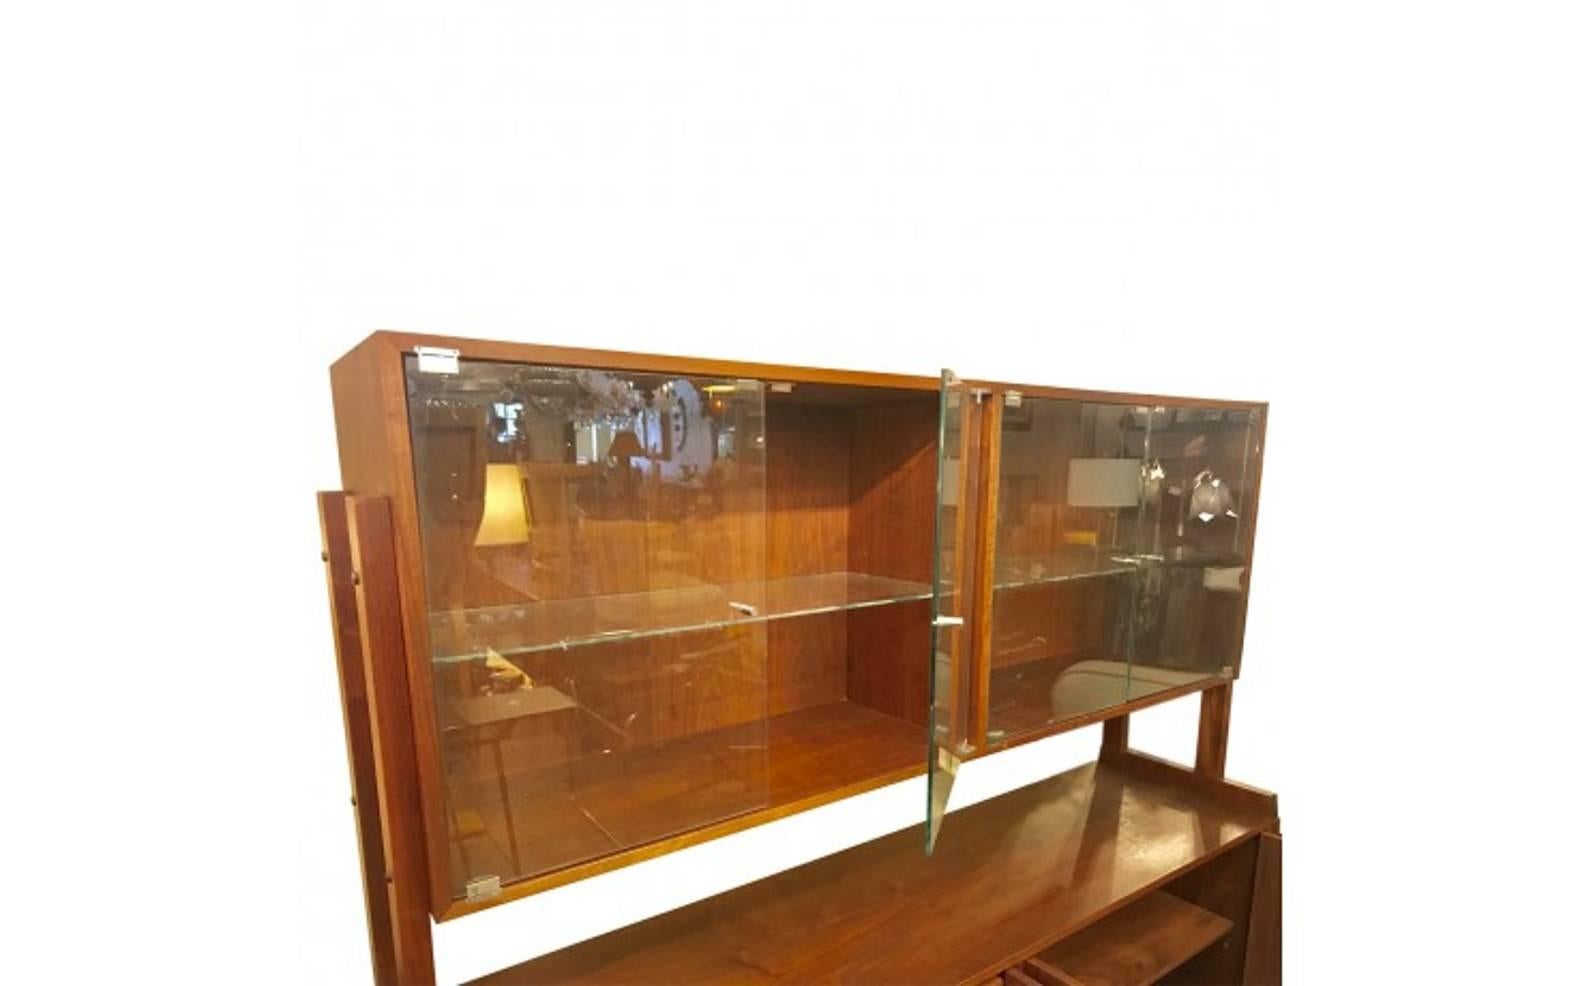 Mid-Century Modern Scandinavian sold teak credenza bookcase hutch with glass shelves and lower drawers in excellent used condition.
Centre section (open area): Height 12inches
Upper cabinet: Width 33 inches depth 14inches height 22inches
Lower